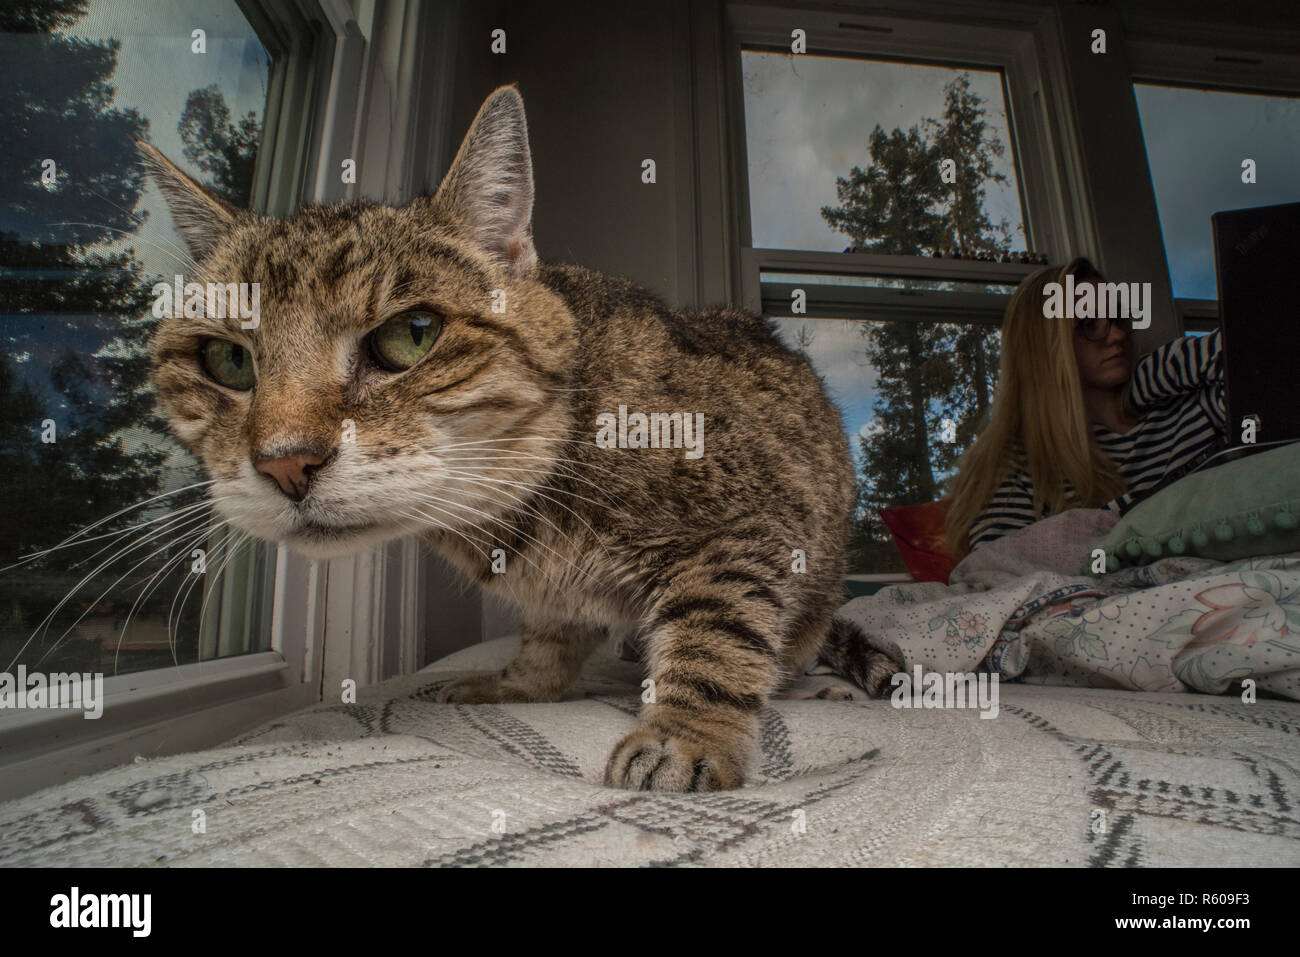 A indoor cat walking by a window peering into the outdoors. Stock Photo